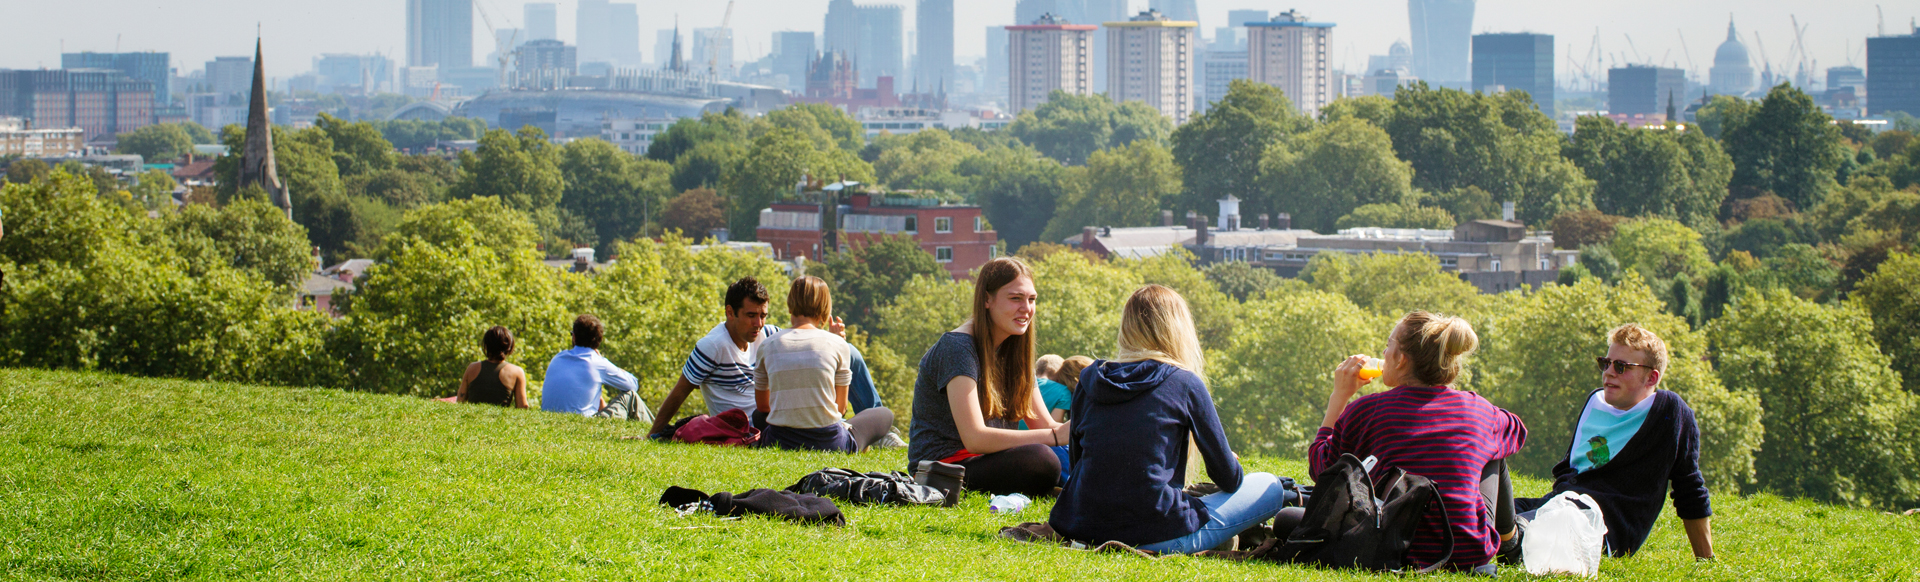 A group of people sitting in a green and sunny park at Hampstead Heath with the London skyline in the background.